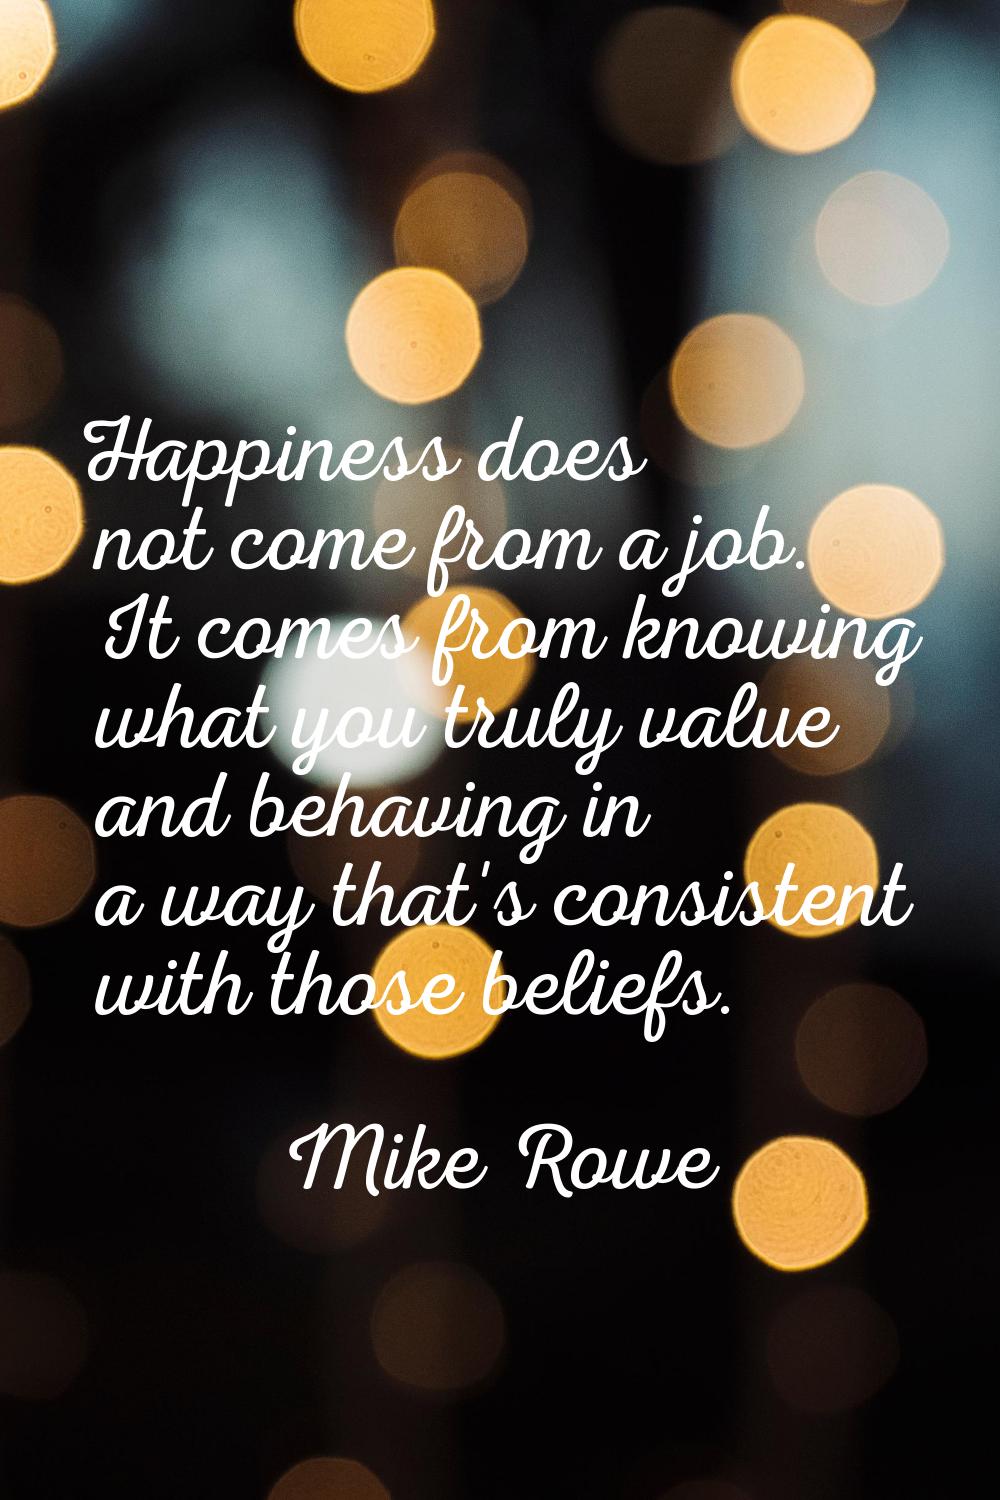 Happiness does not come from a job. It comes from knowing what you truly value and behaving in a wa